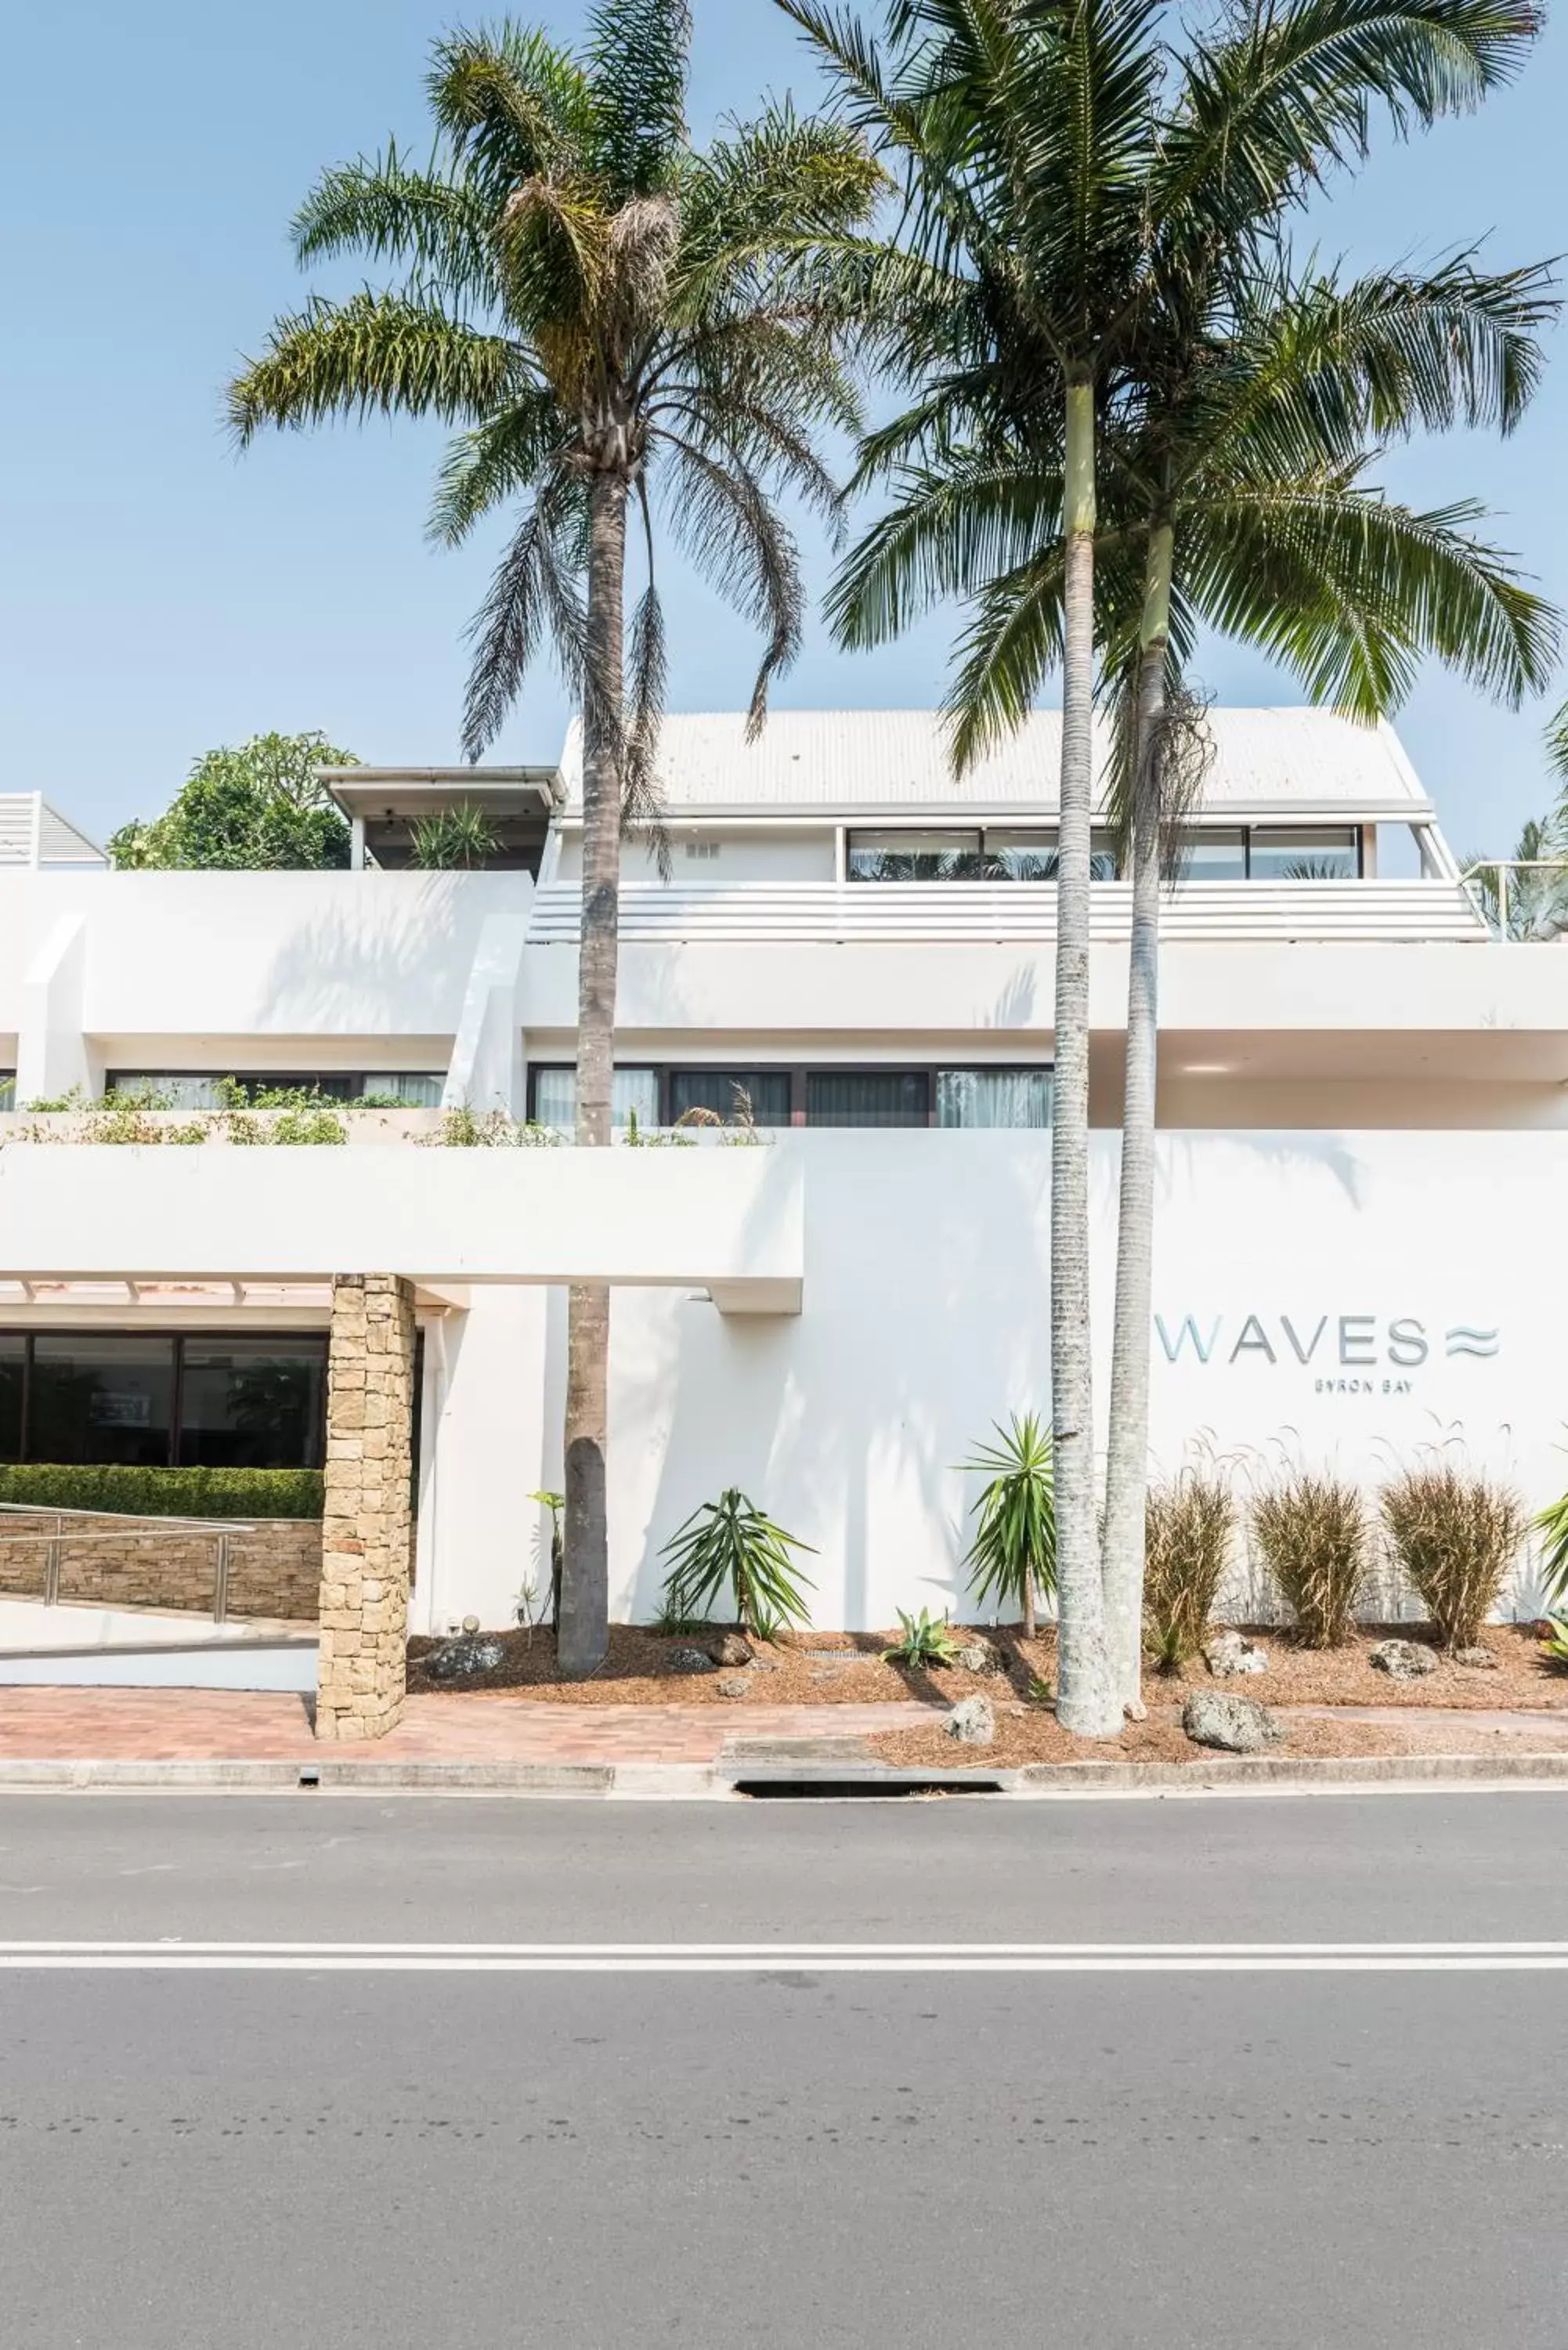 Property Building in Waves Byron Bay